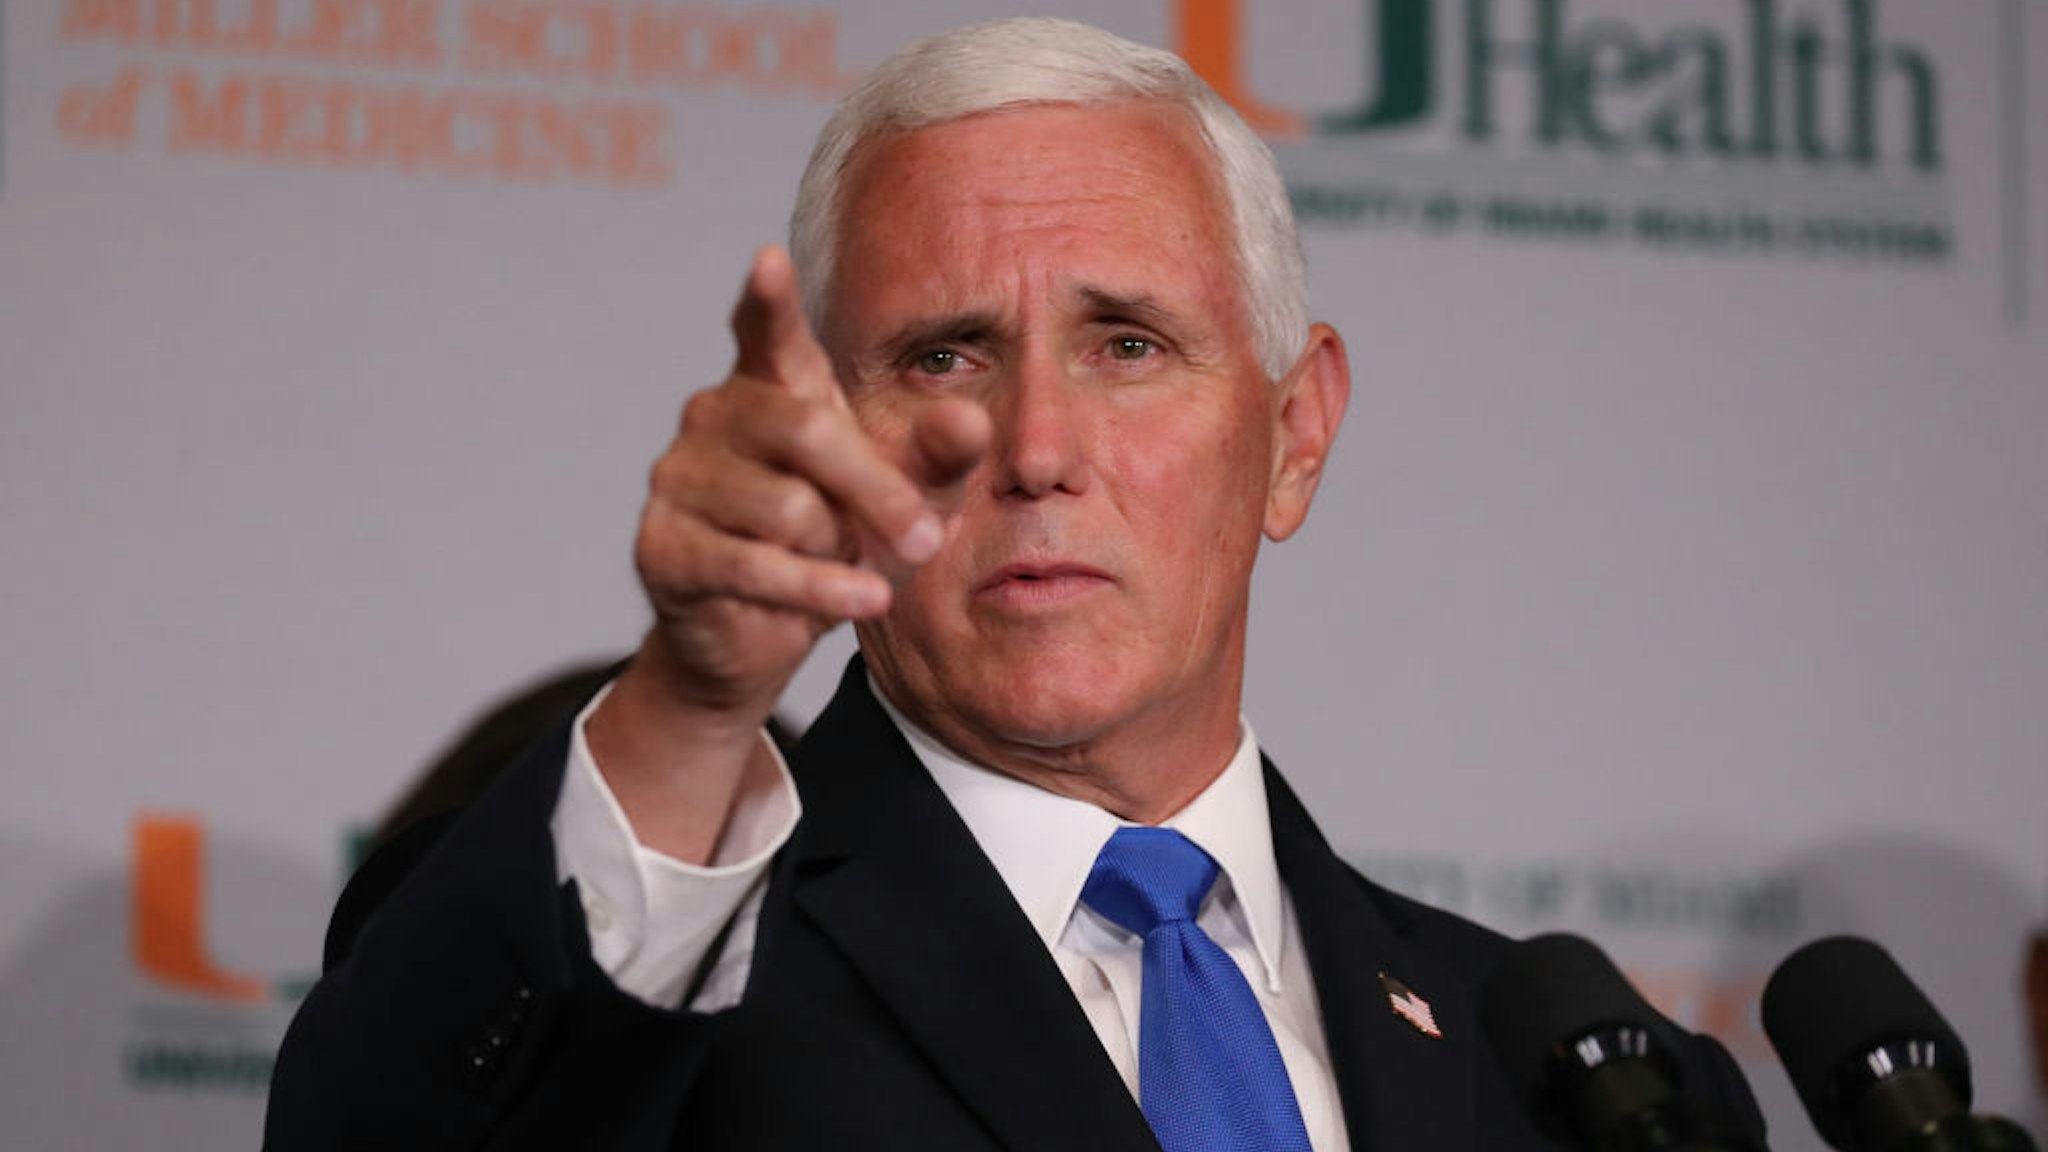 Vice President Mike Pence speaks during a press conference at the the University of Miami Miller School of Medicine on July 27, 2020 in Miami, Florida.